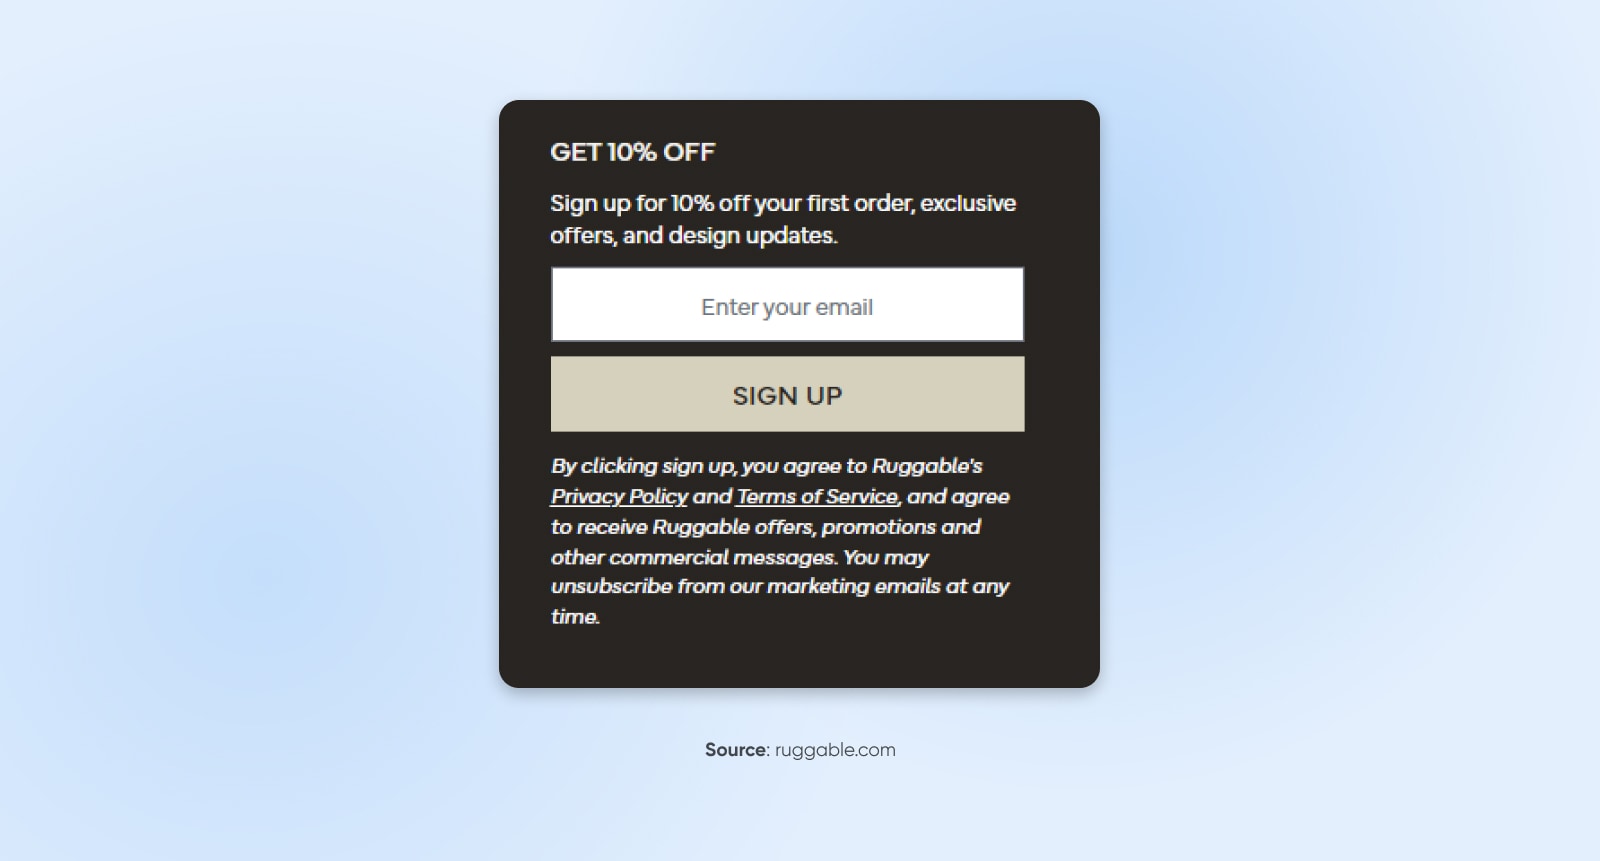 example of a opt-in sign up form asking to enter your email and sign up to get 10% off